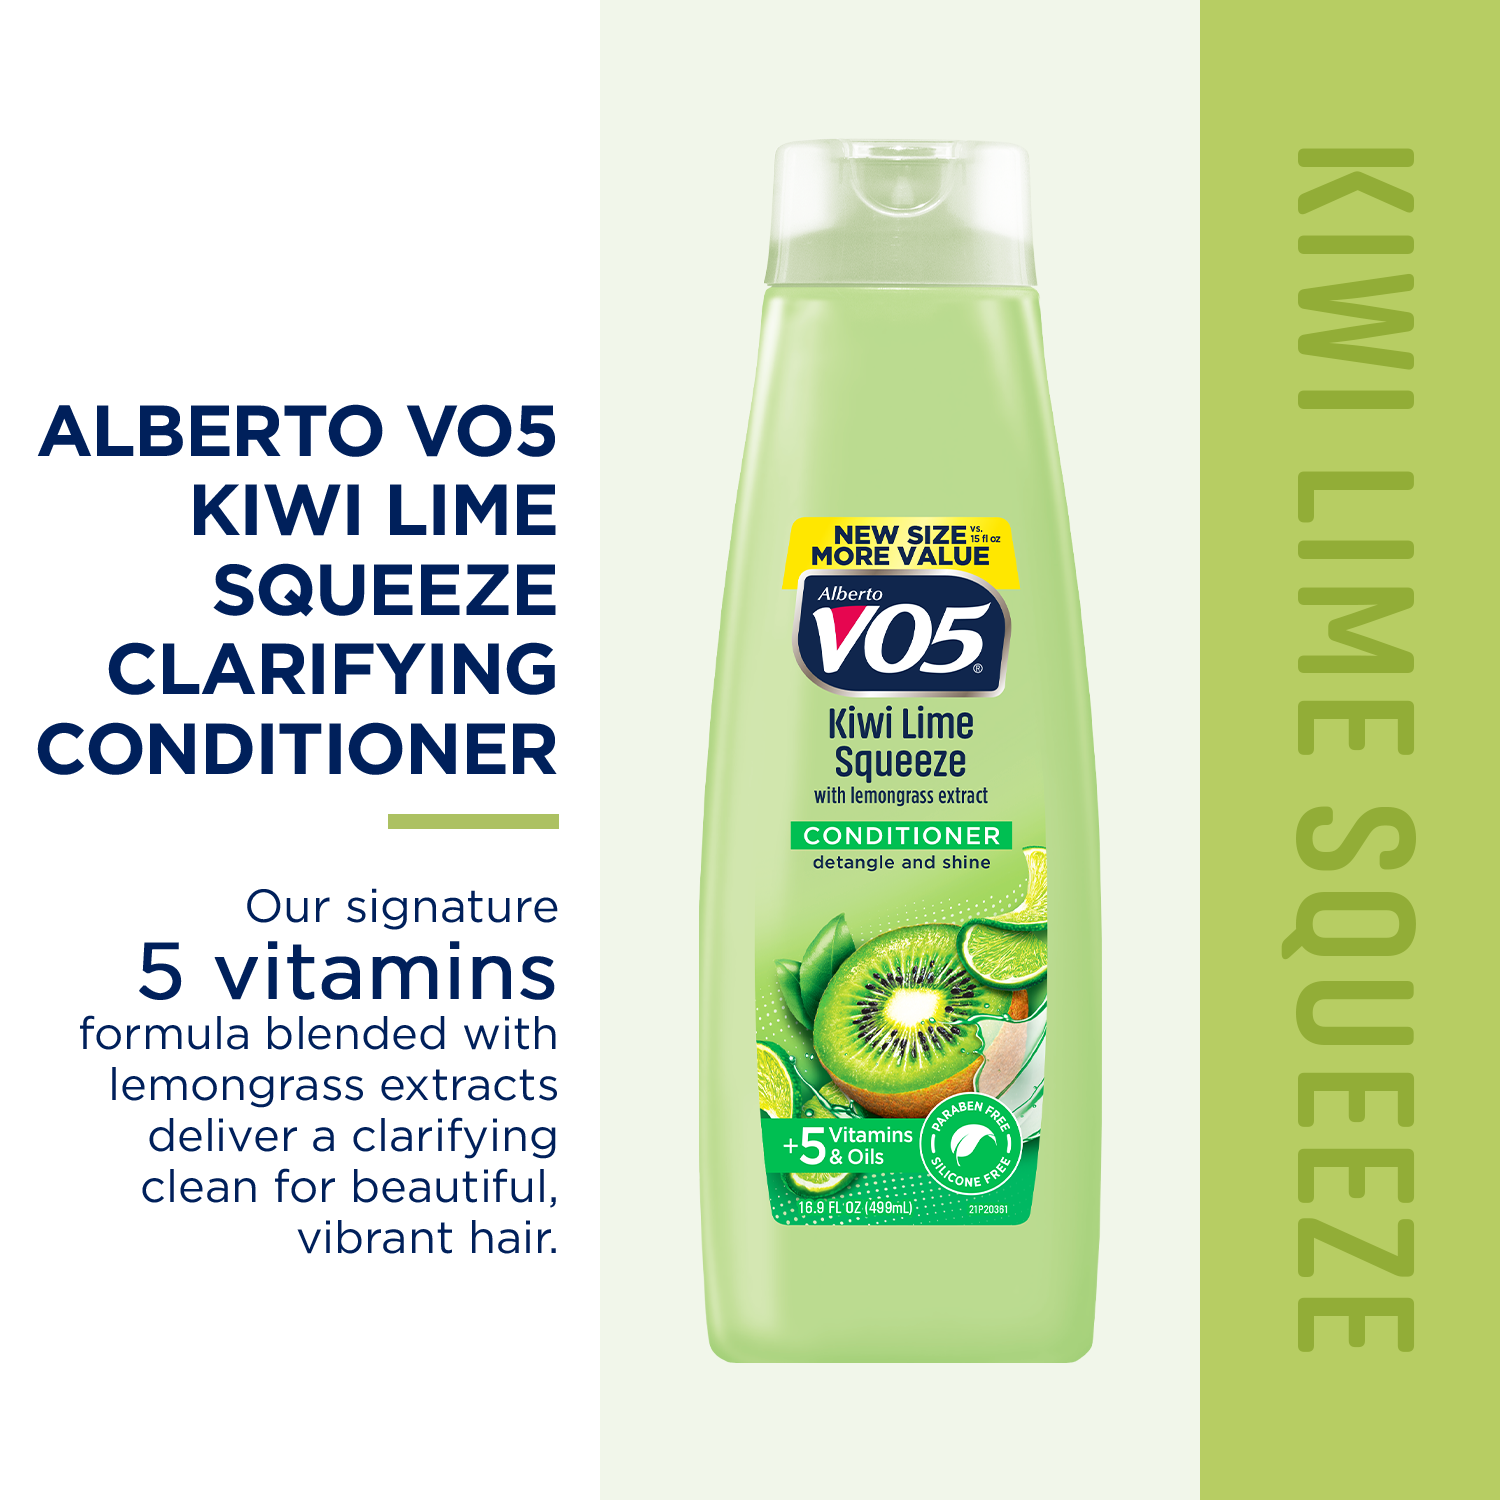 Alberto VO5 Kiwi Lime Squeeze Conditioner with Vitamin E & C, for All Hair Types, 16.9 fl oz - image 3 of 6